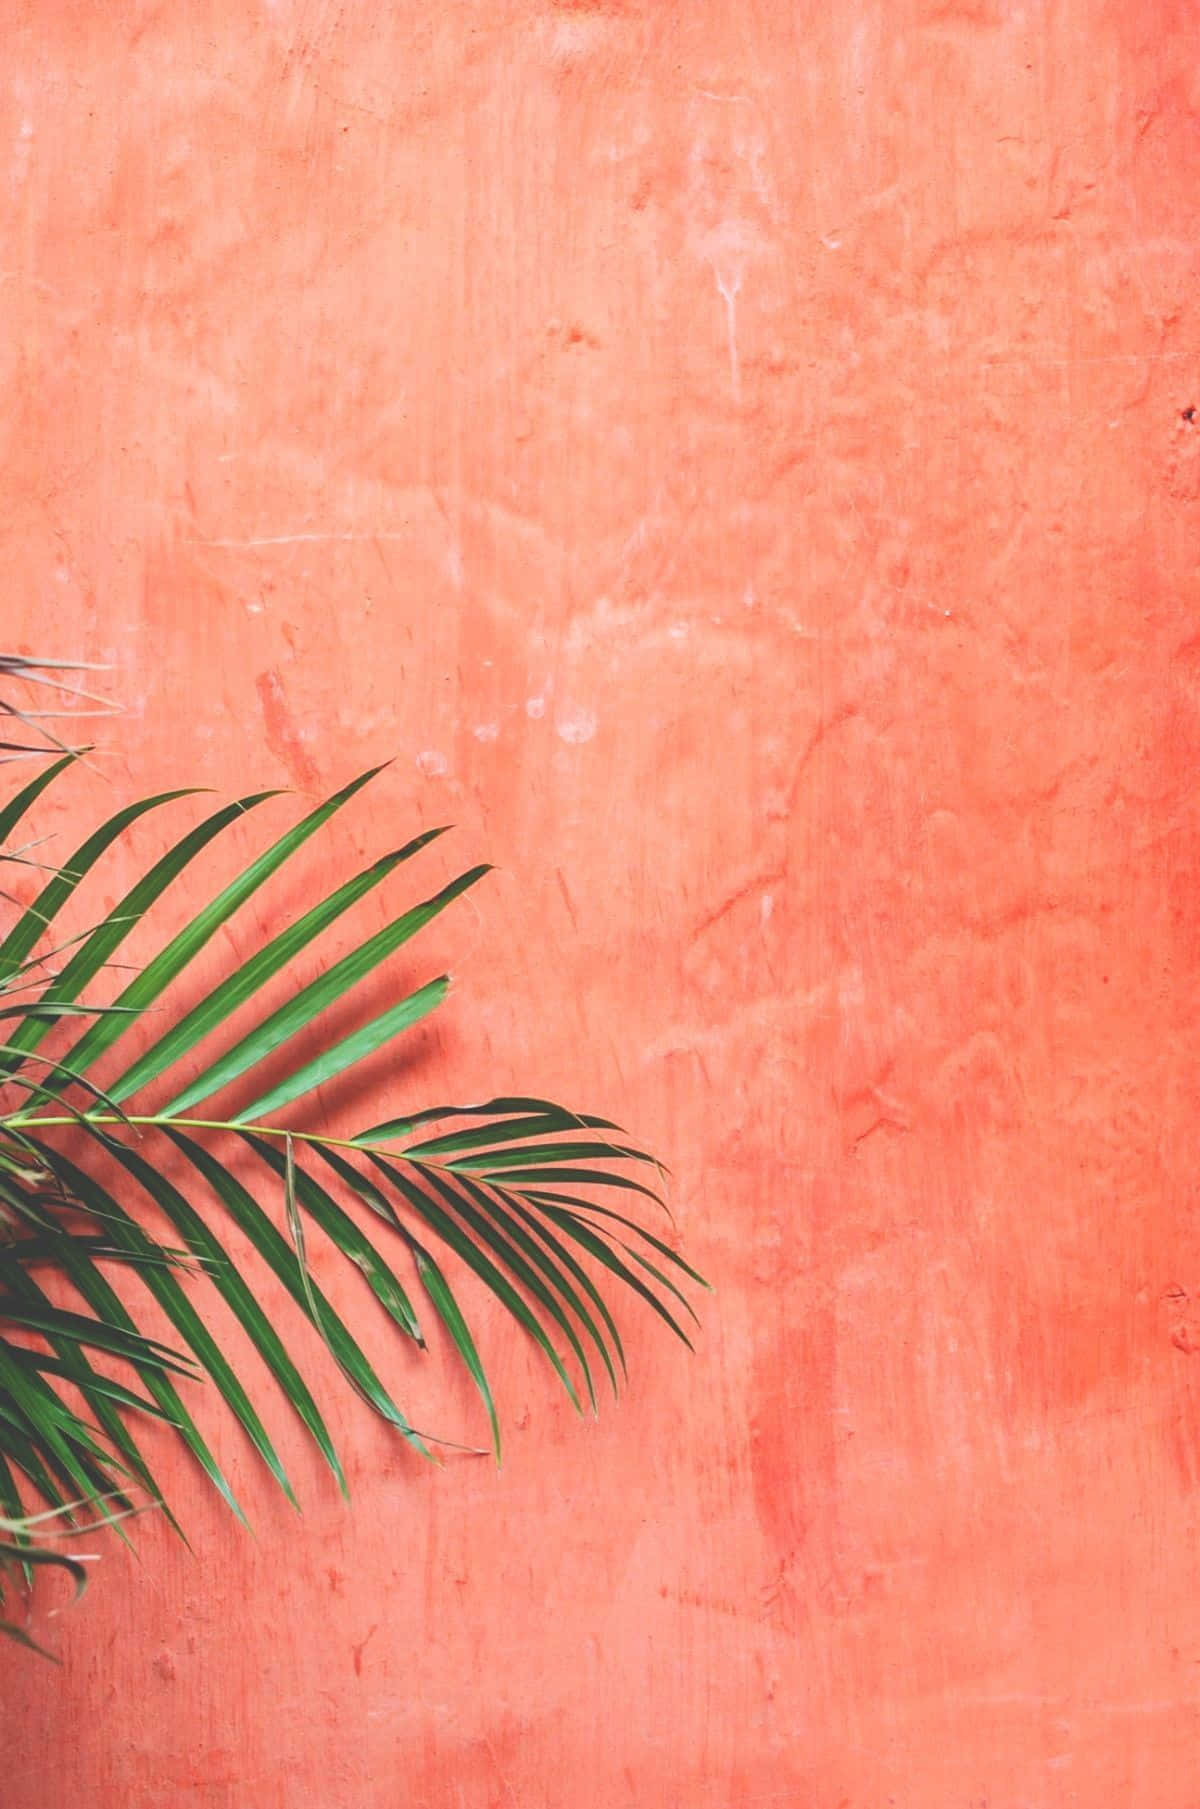 Coral Backdropwith Palm Frond Wallpaper